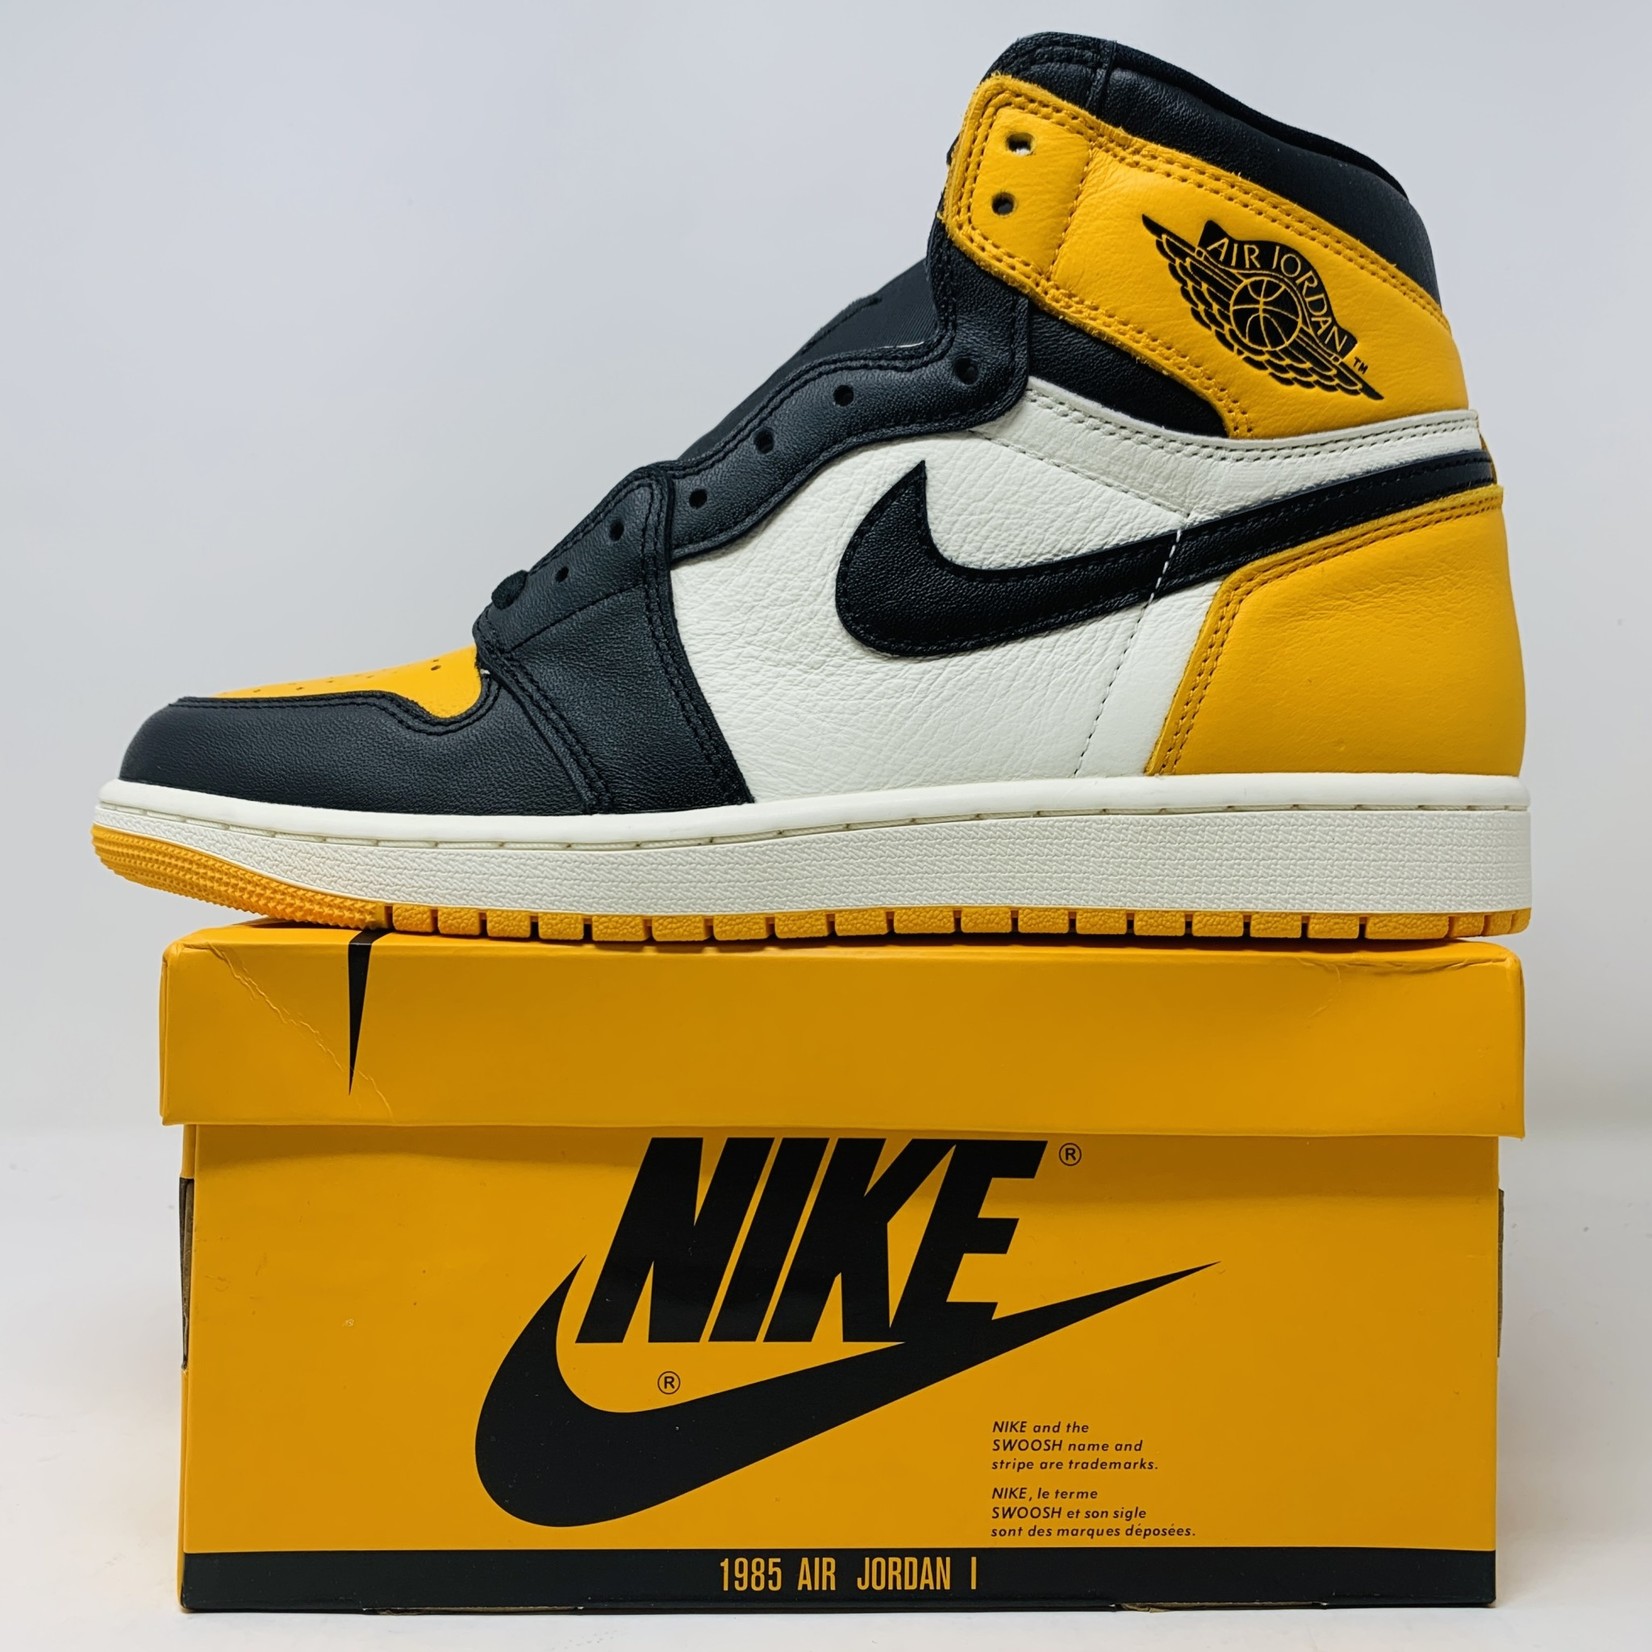 Jordan 1 Taxi   Holy Ground Sneaker Shop   Buy, Sell & Trade Sneakers